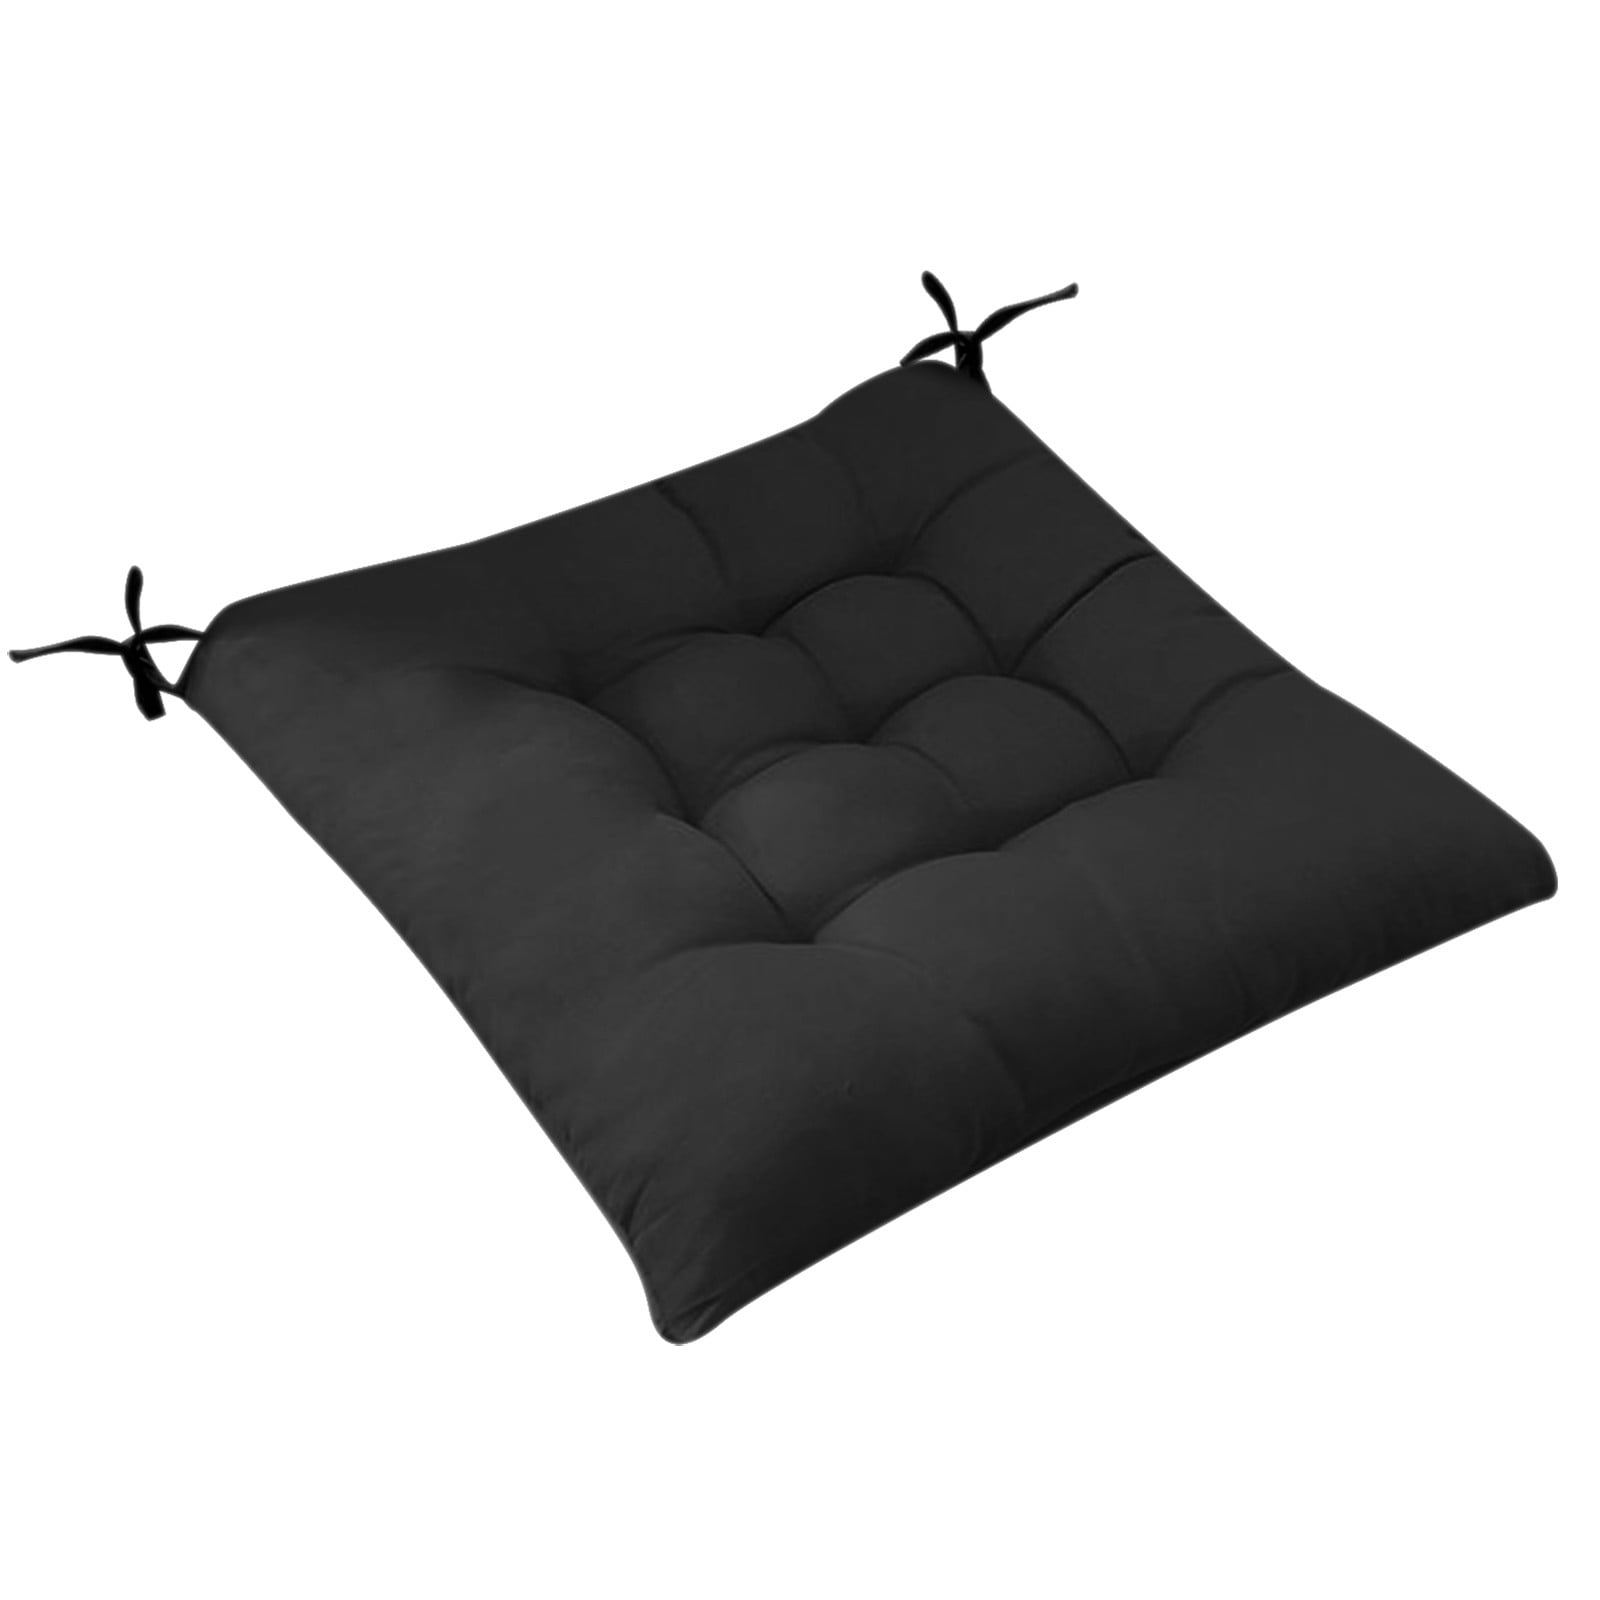 Yipto Large Floor Pillows Seating for Adults and Vietnam